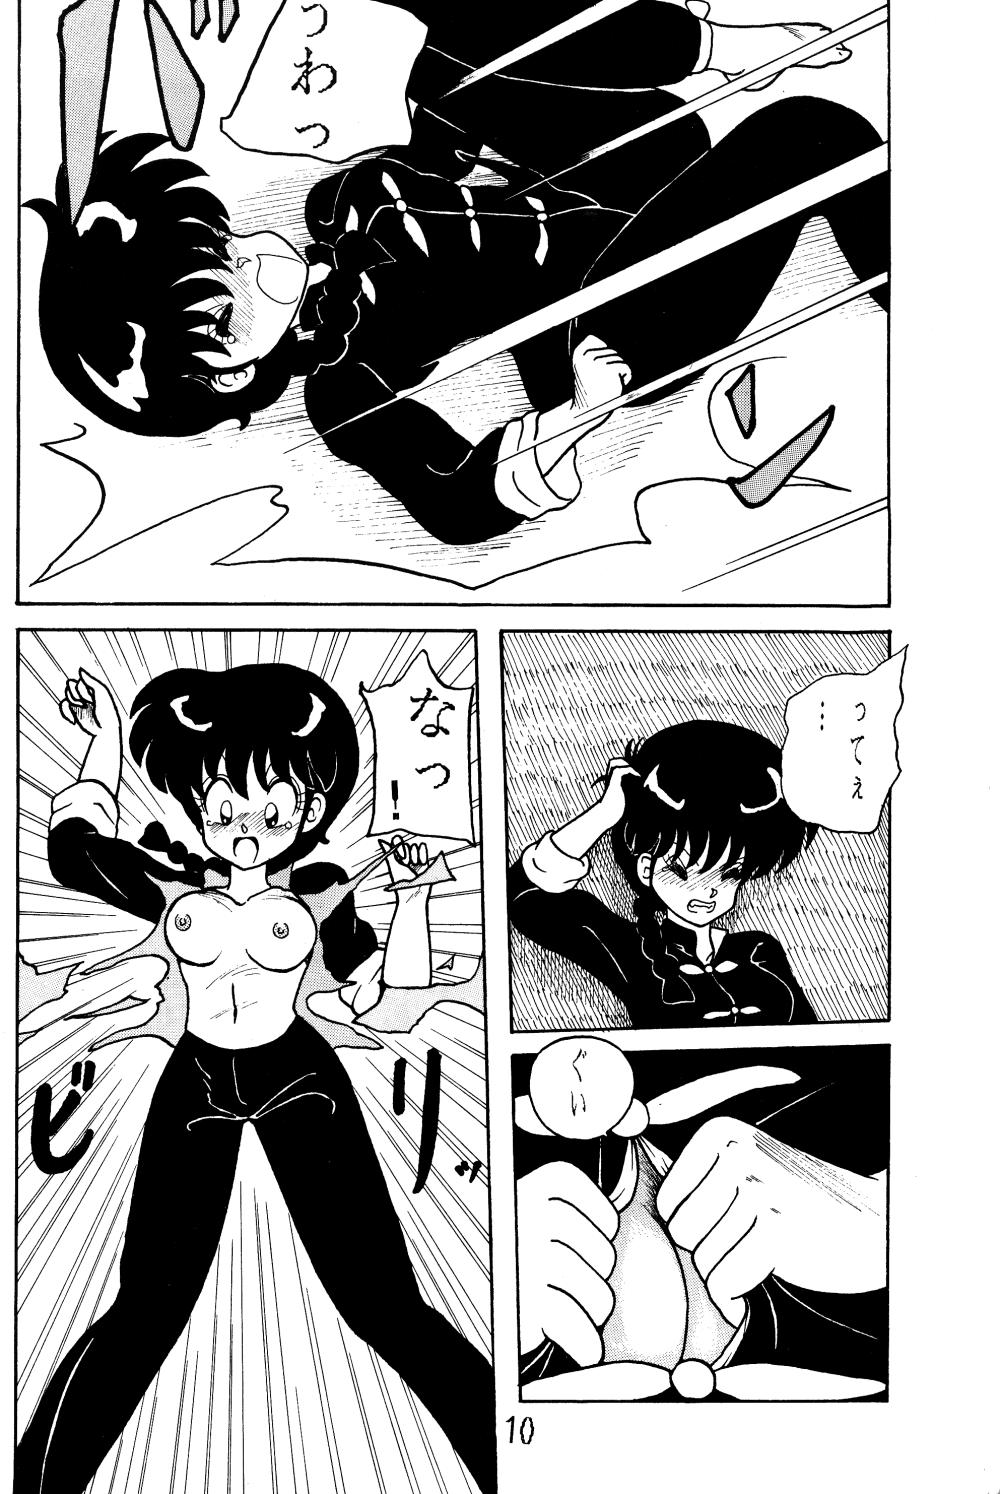 NOTORIOUS Ranma 1/2 Special 8